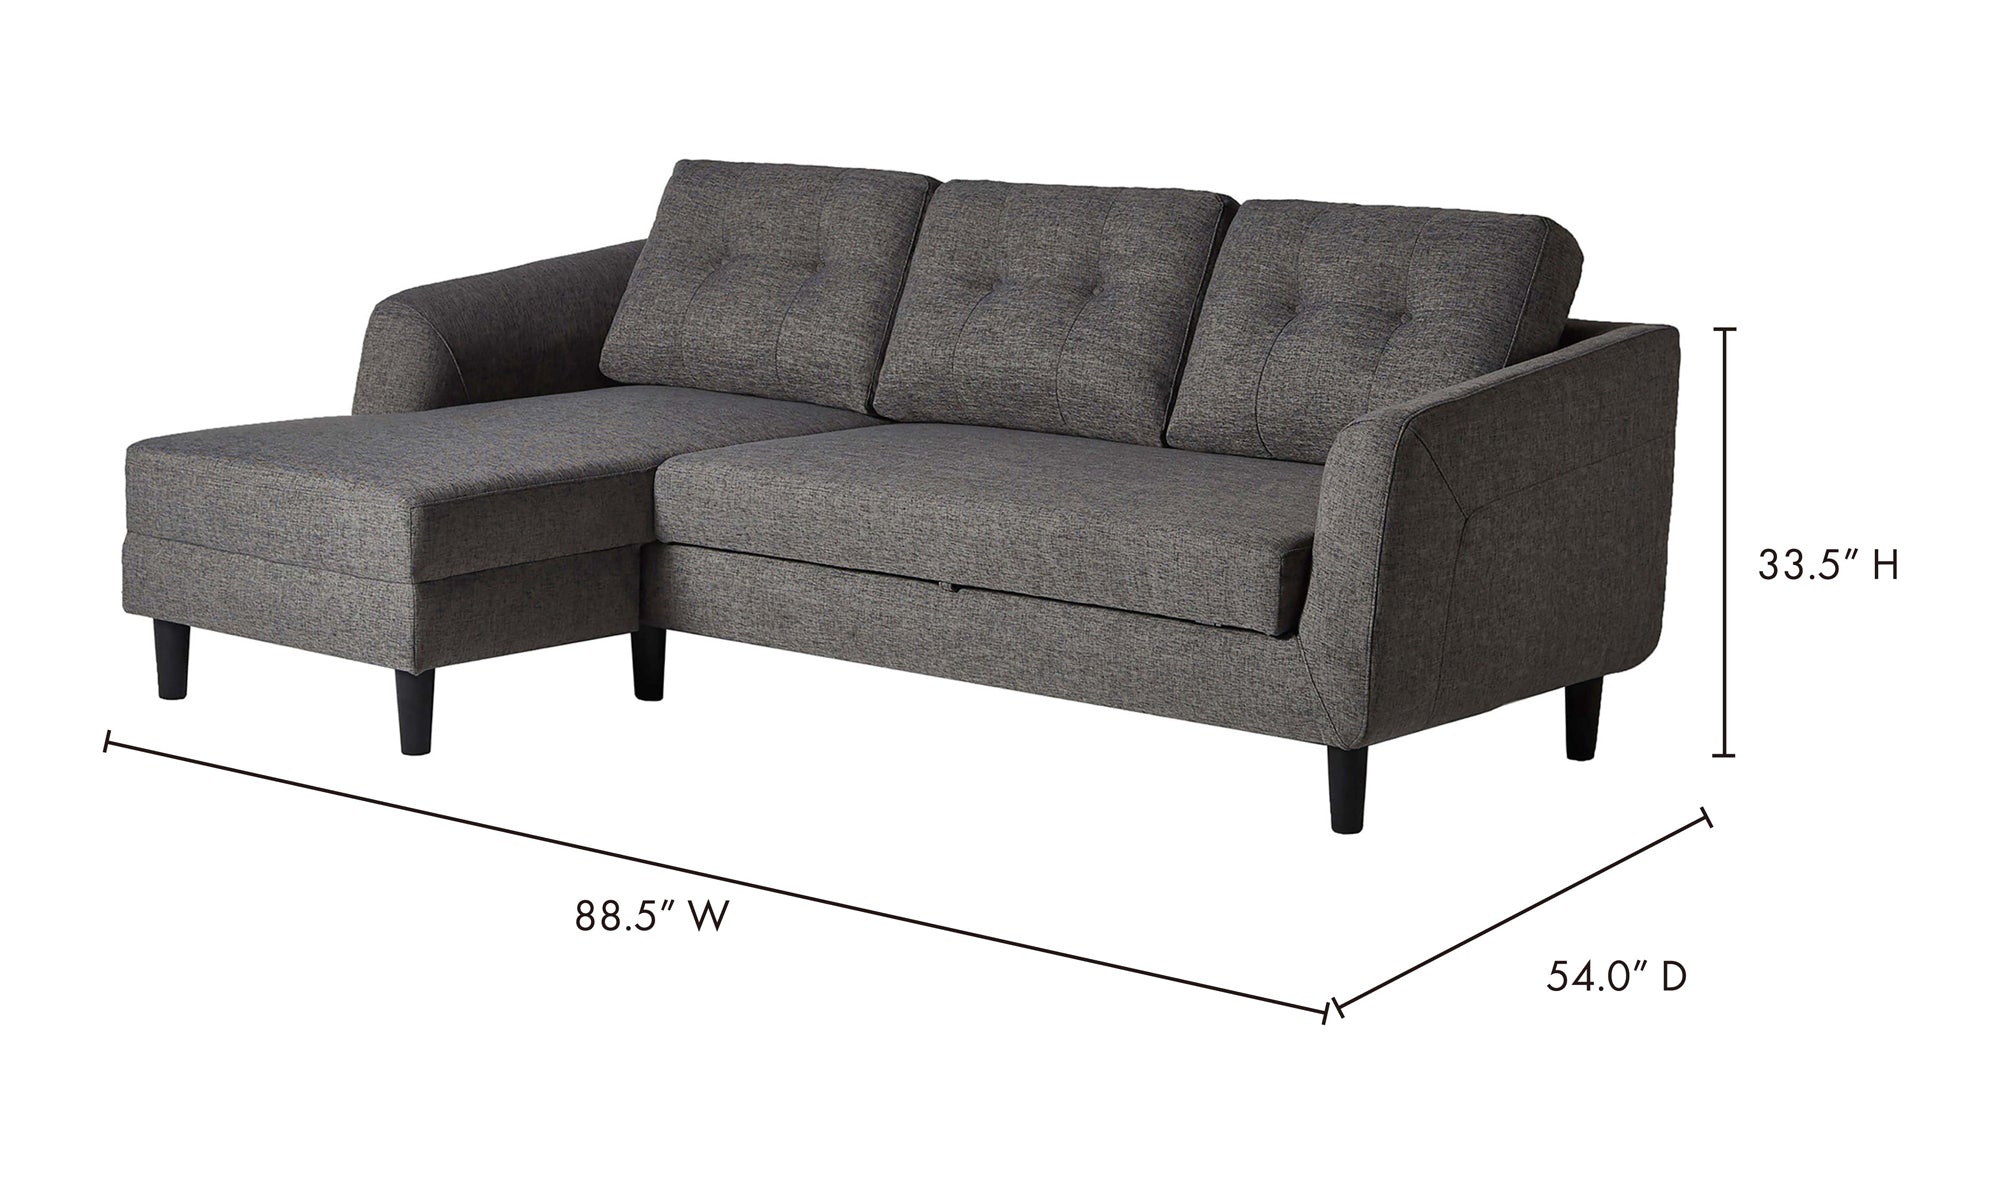 Belagio Left Facing Sofa Bed With Chaise - Charcoal Grey